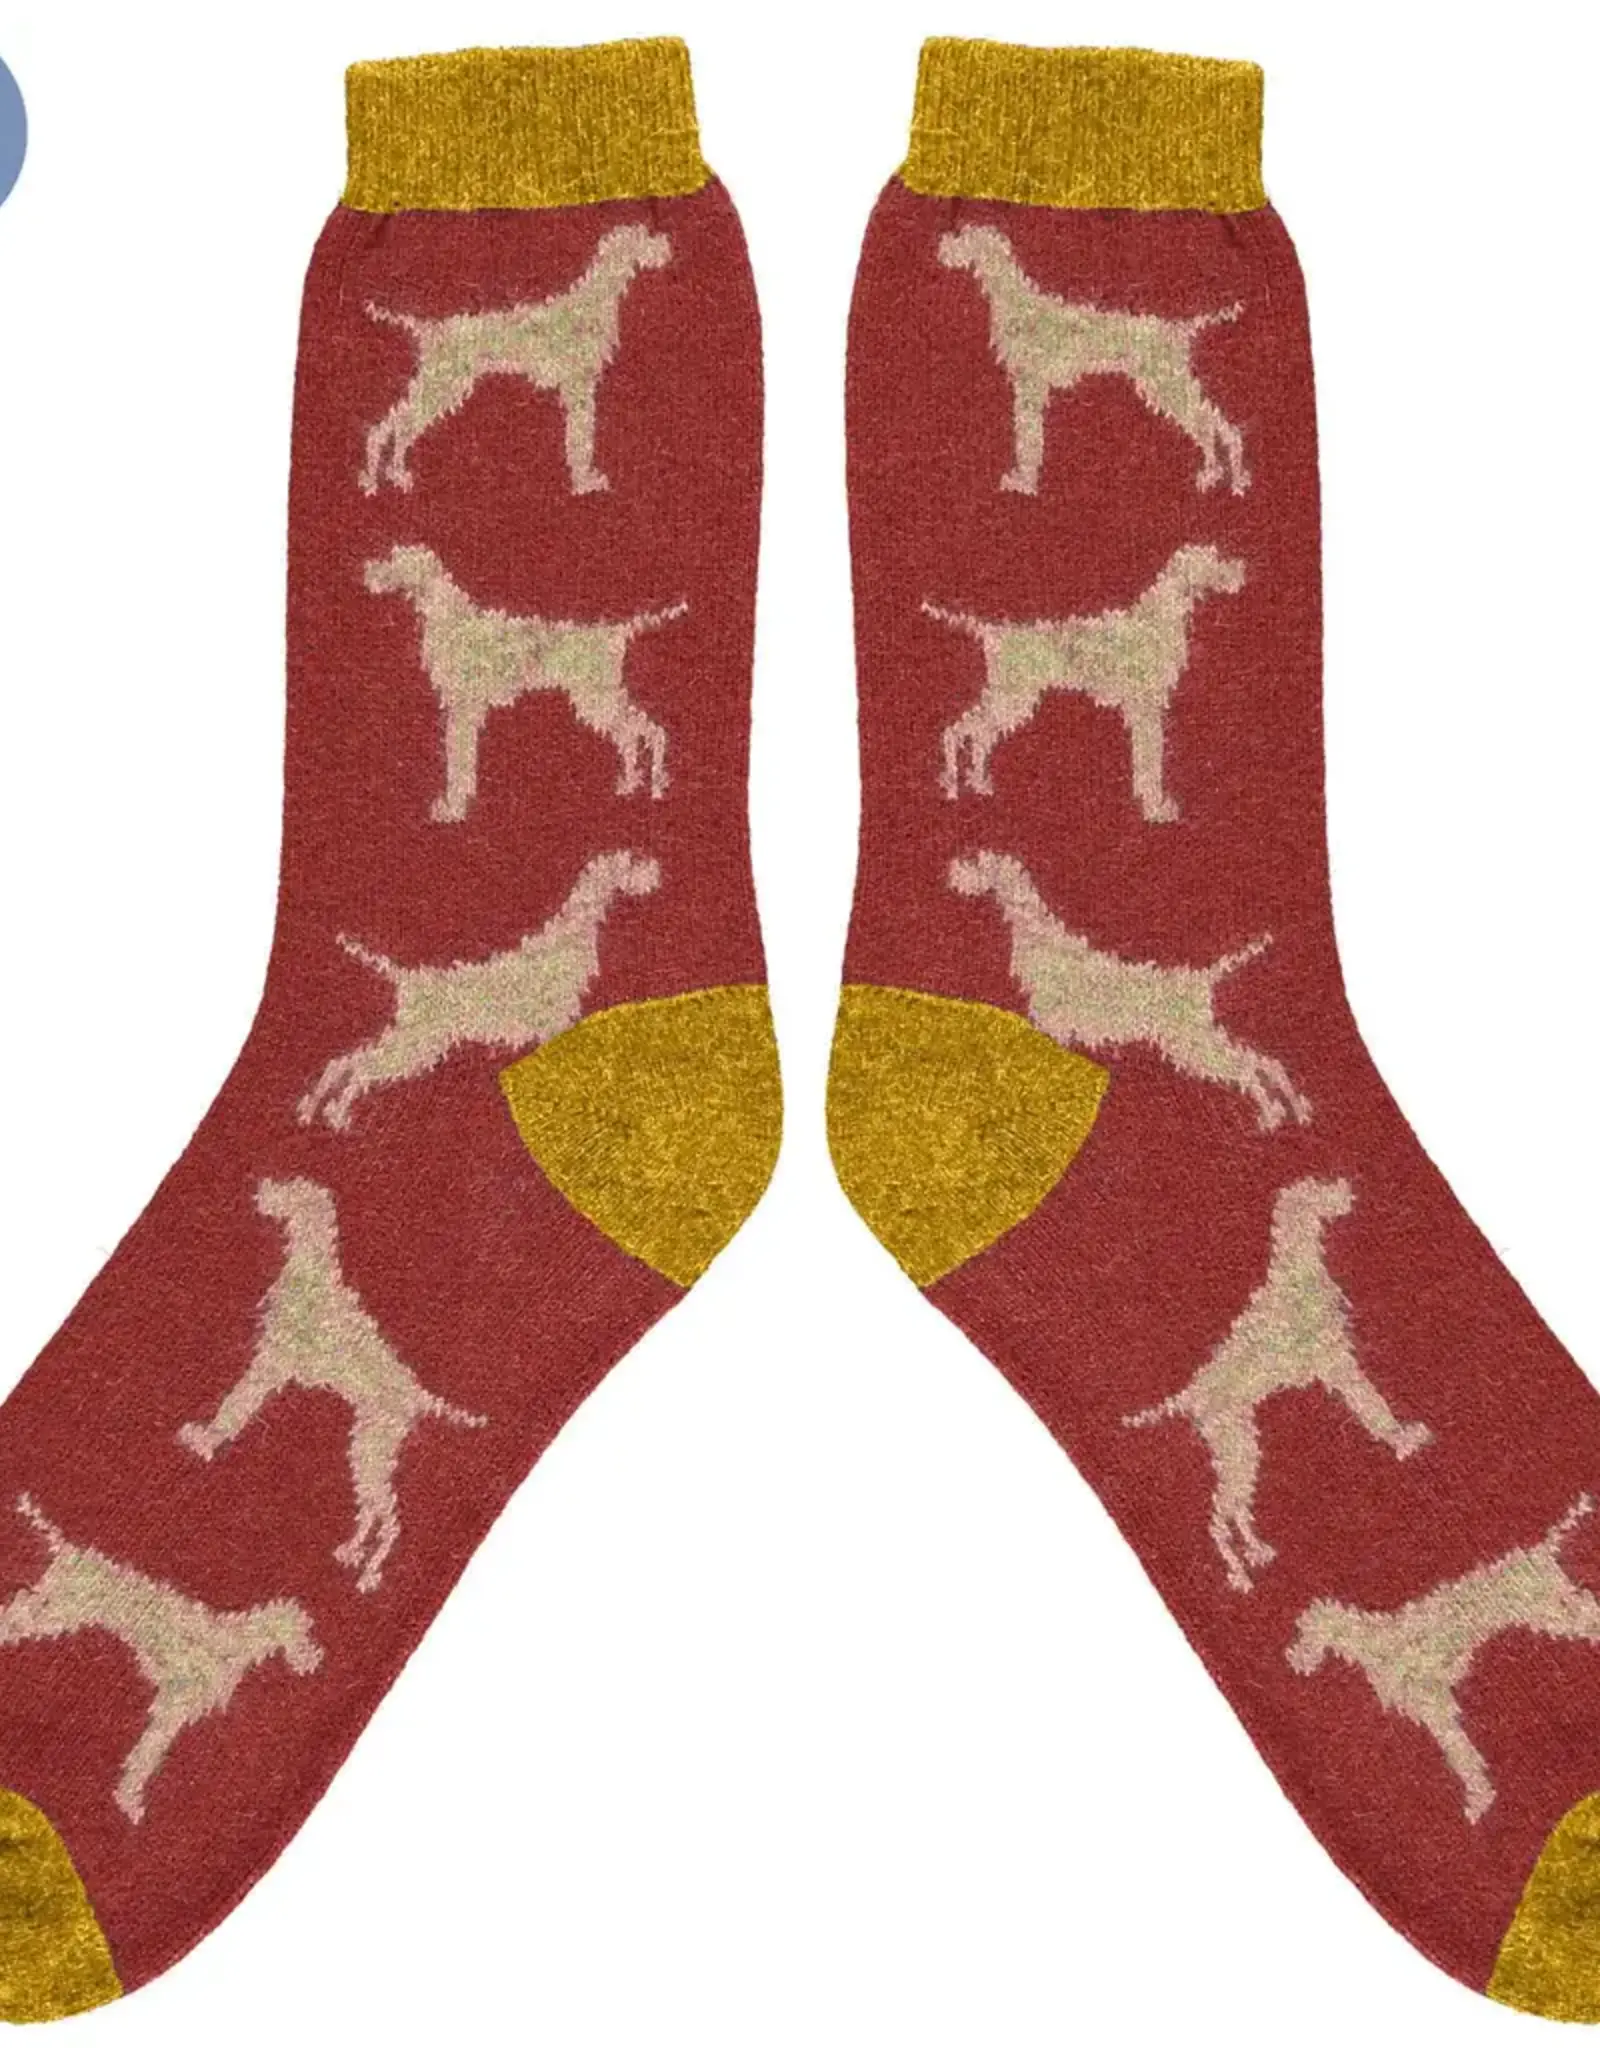 Catherine Tough - Lambswool Ankle Socks - Dog Dark Red (Large)